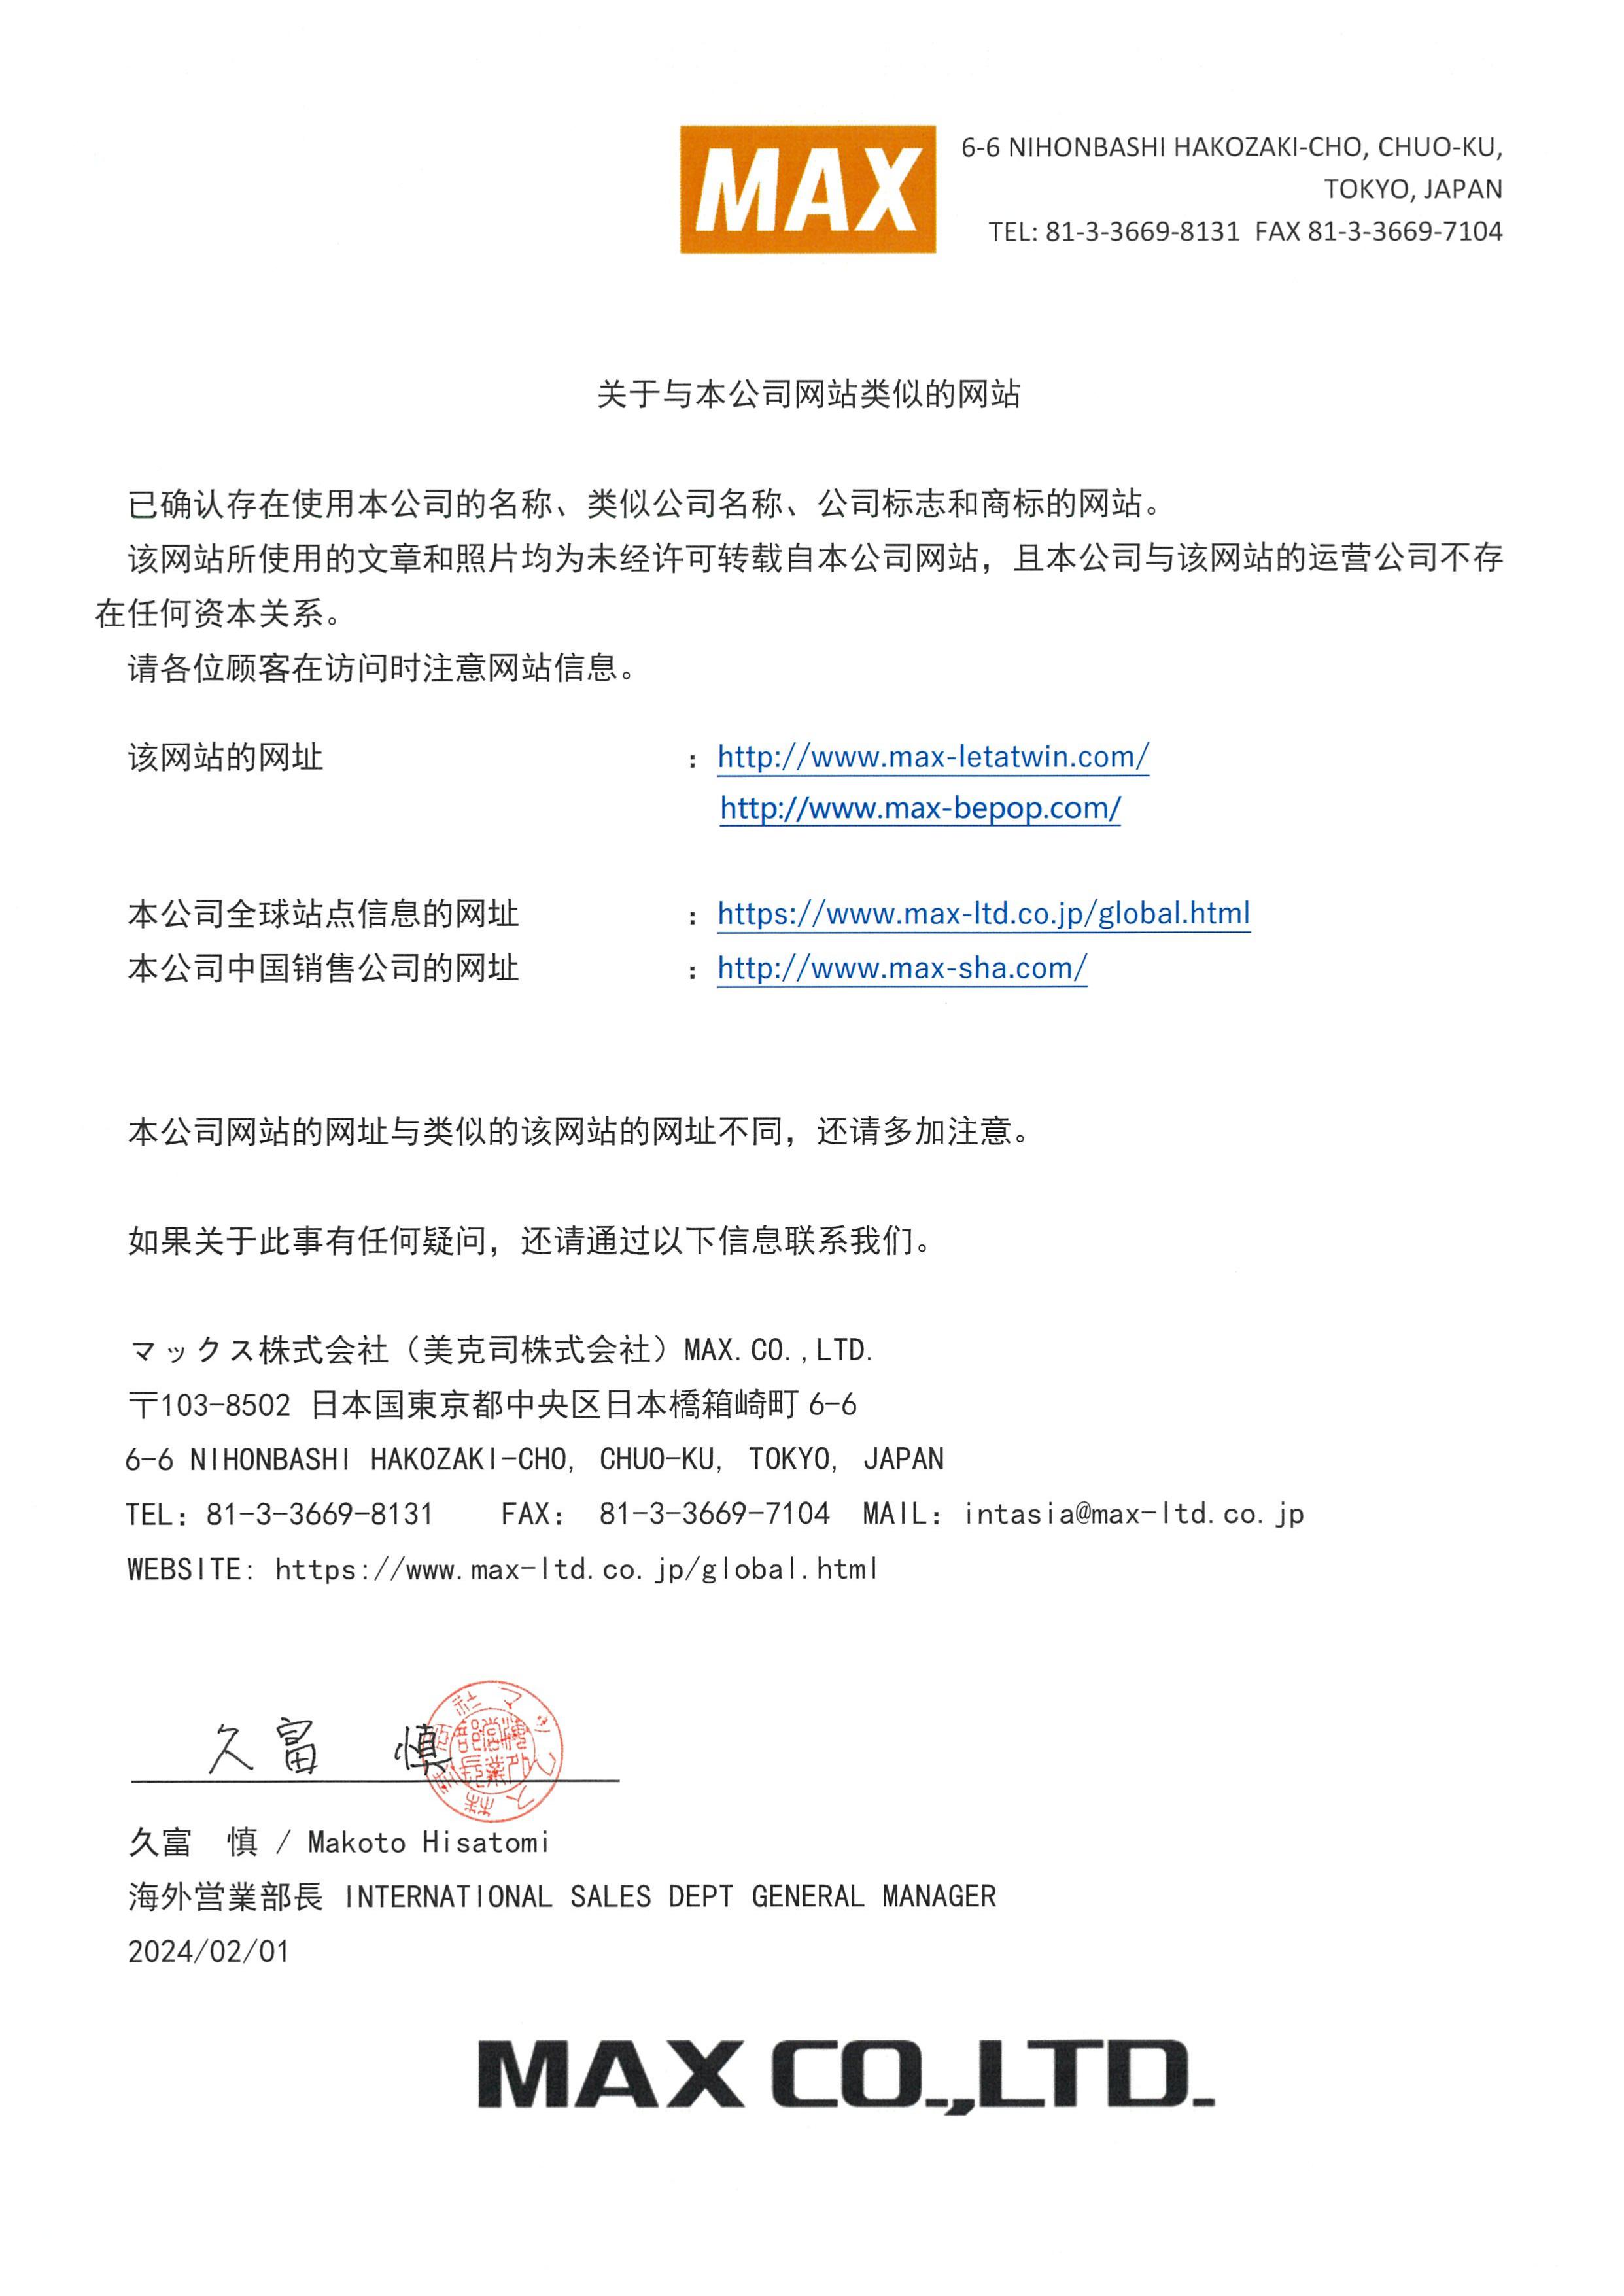 Announcement letter in Chinese  240131.jpg